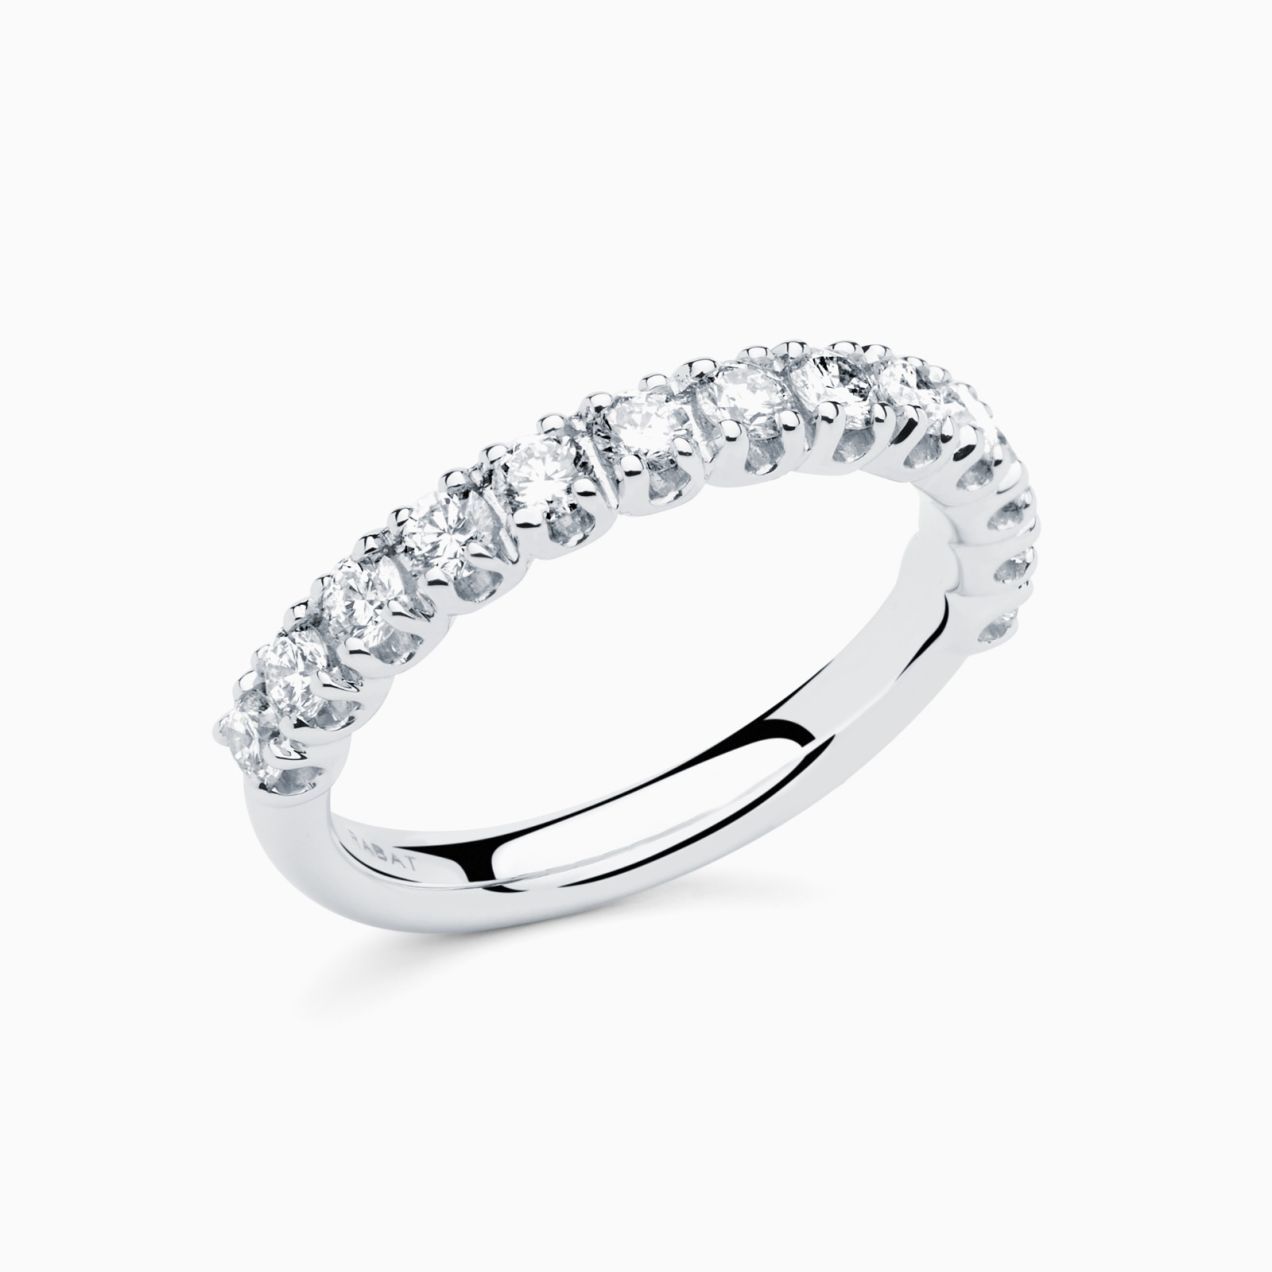 White gold and diamonds engagement ring